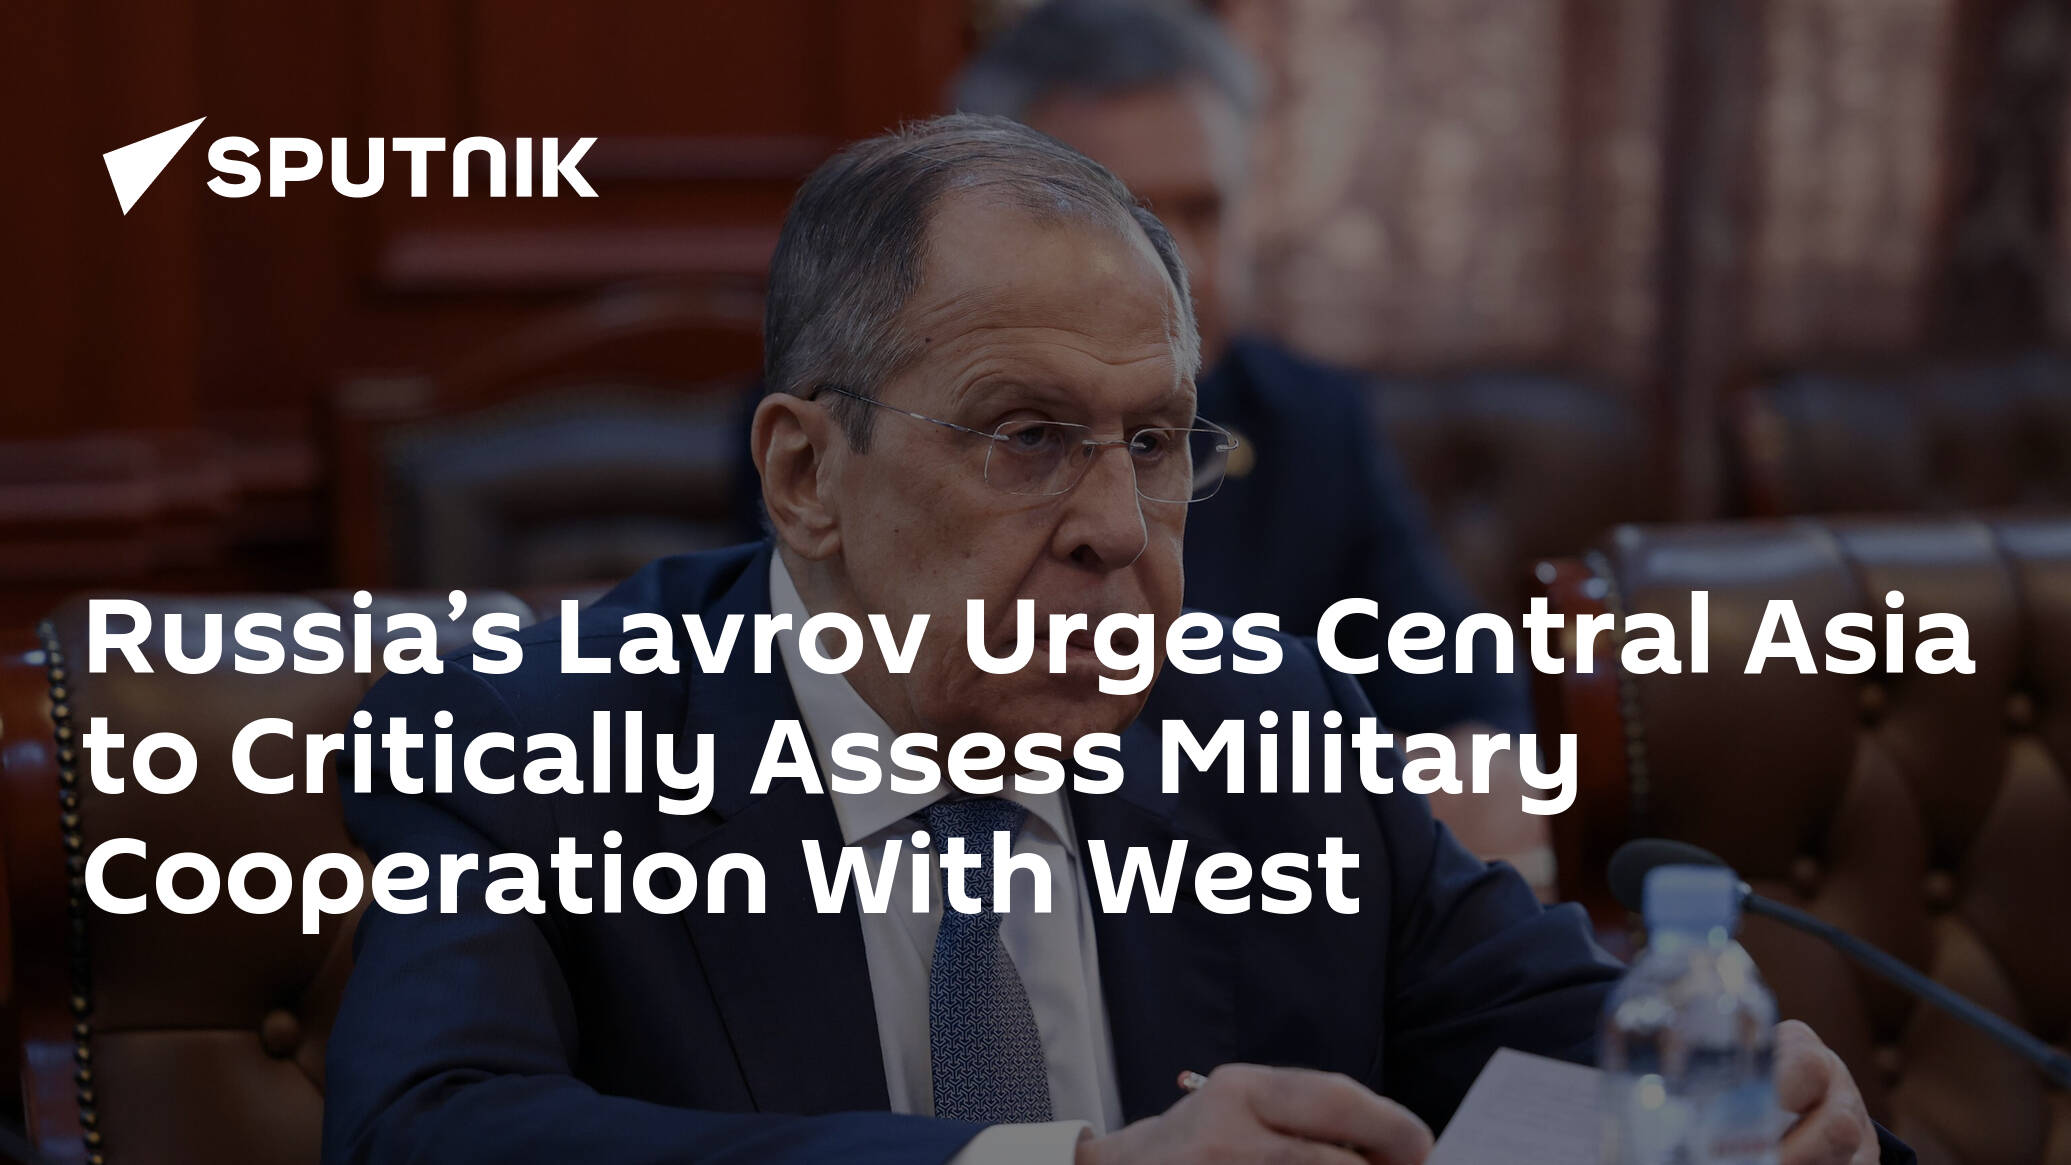 Russia’s Lavrov Urges Central Asia to Critically Assess Military Cooperation With West